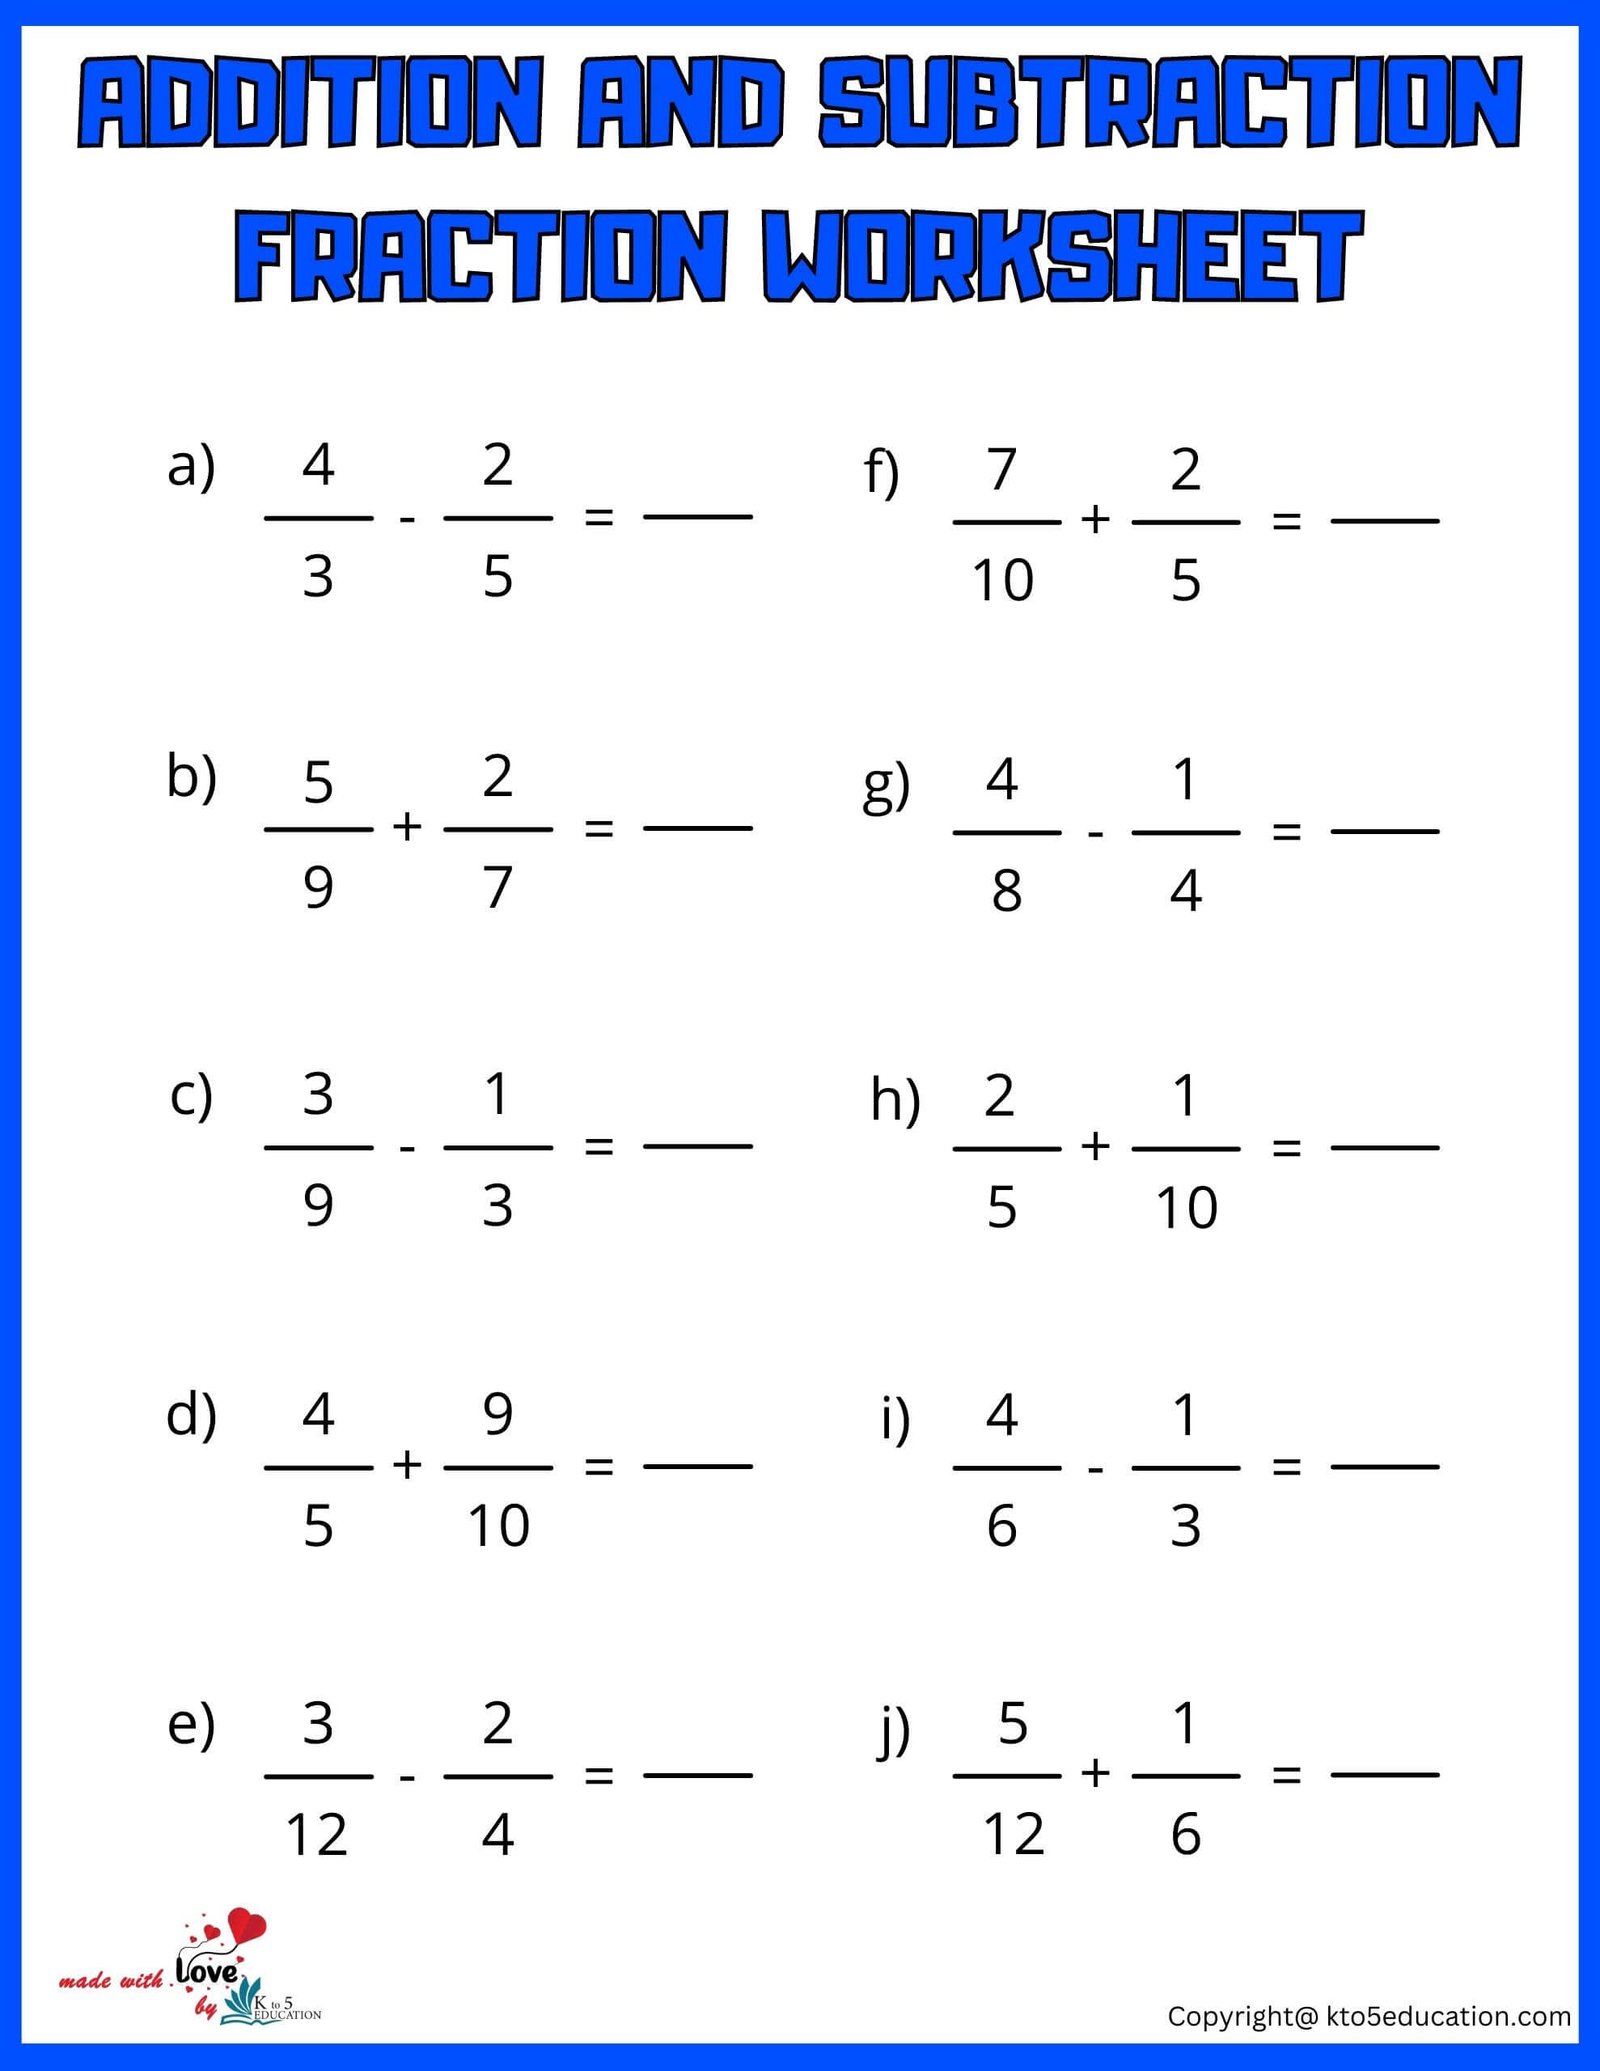 Addition And Subtraction Fraction Worksheet